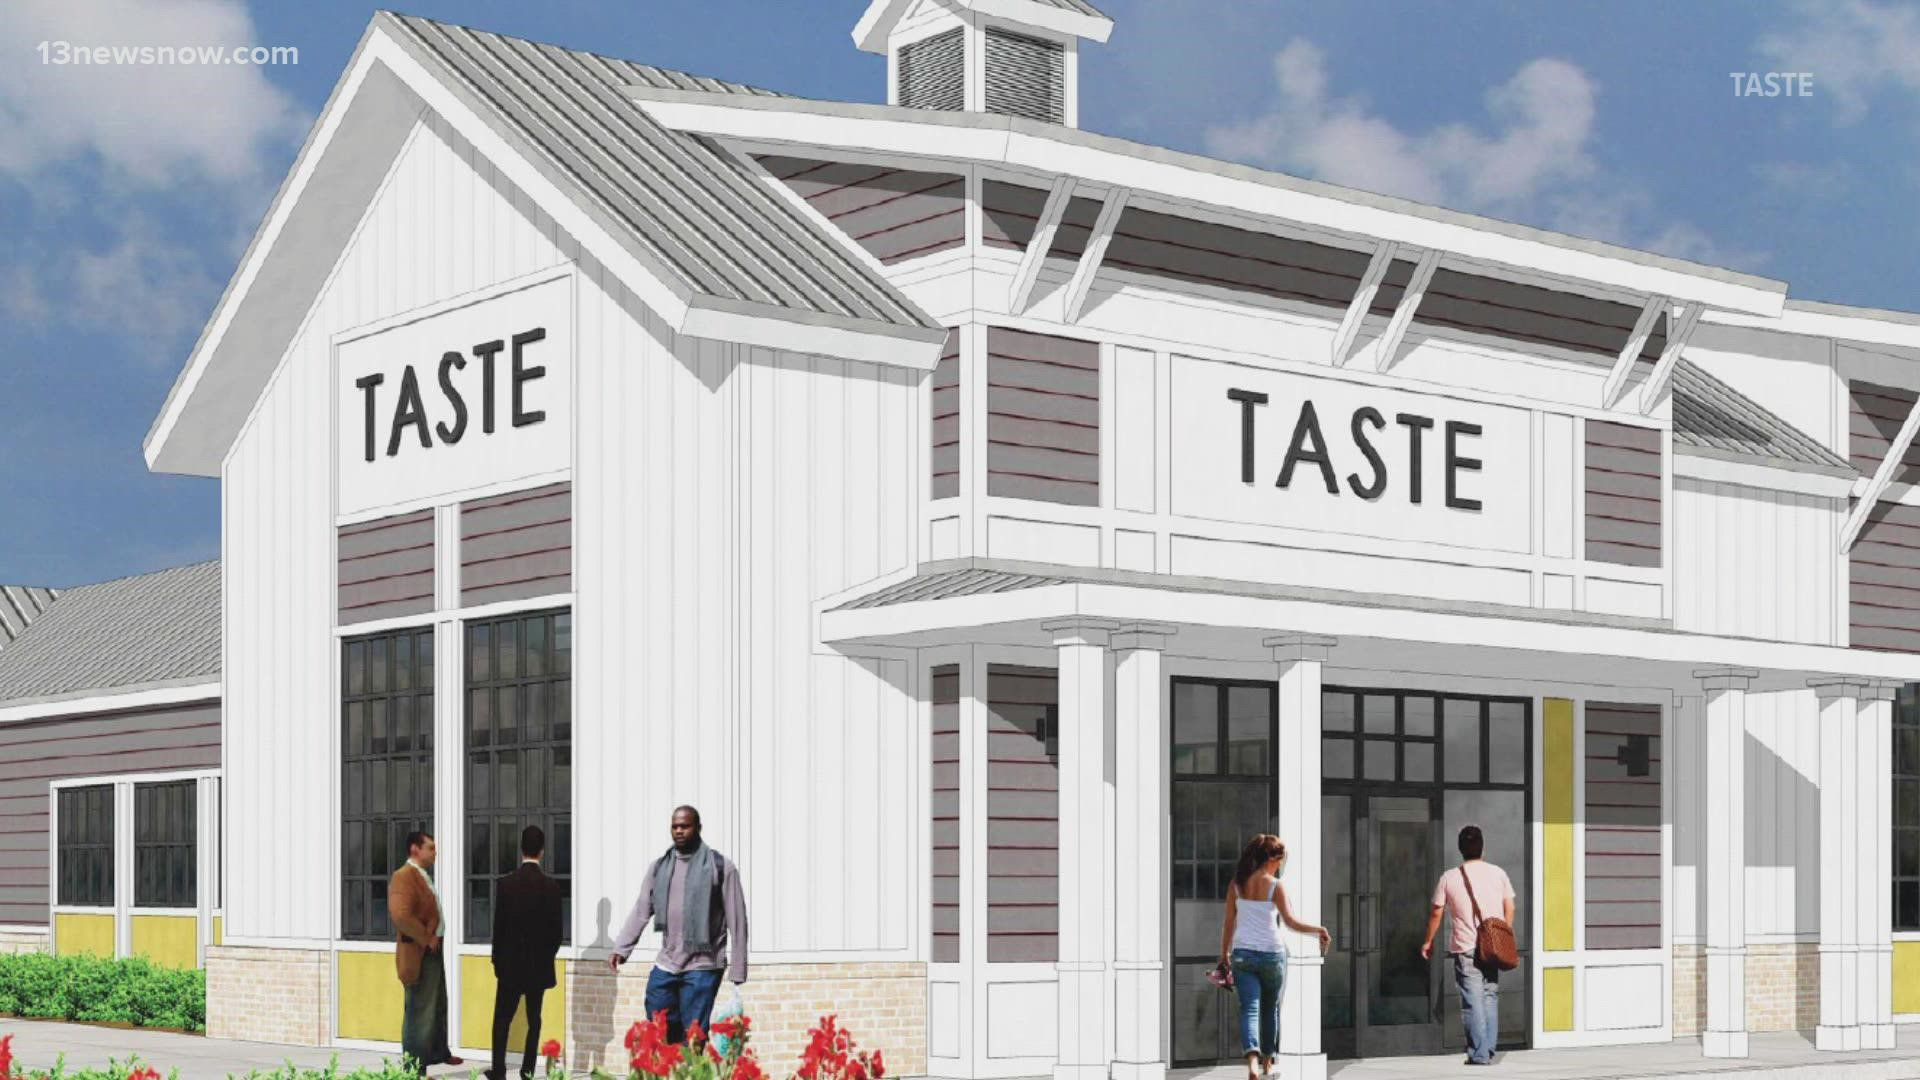 The Hampton Roads staple said it would bring a specialty food café and market to Sherwood Lakes.